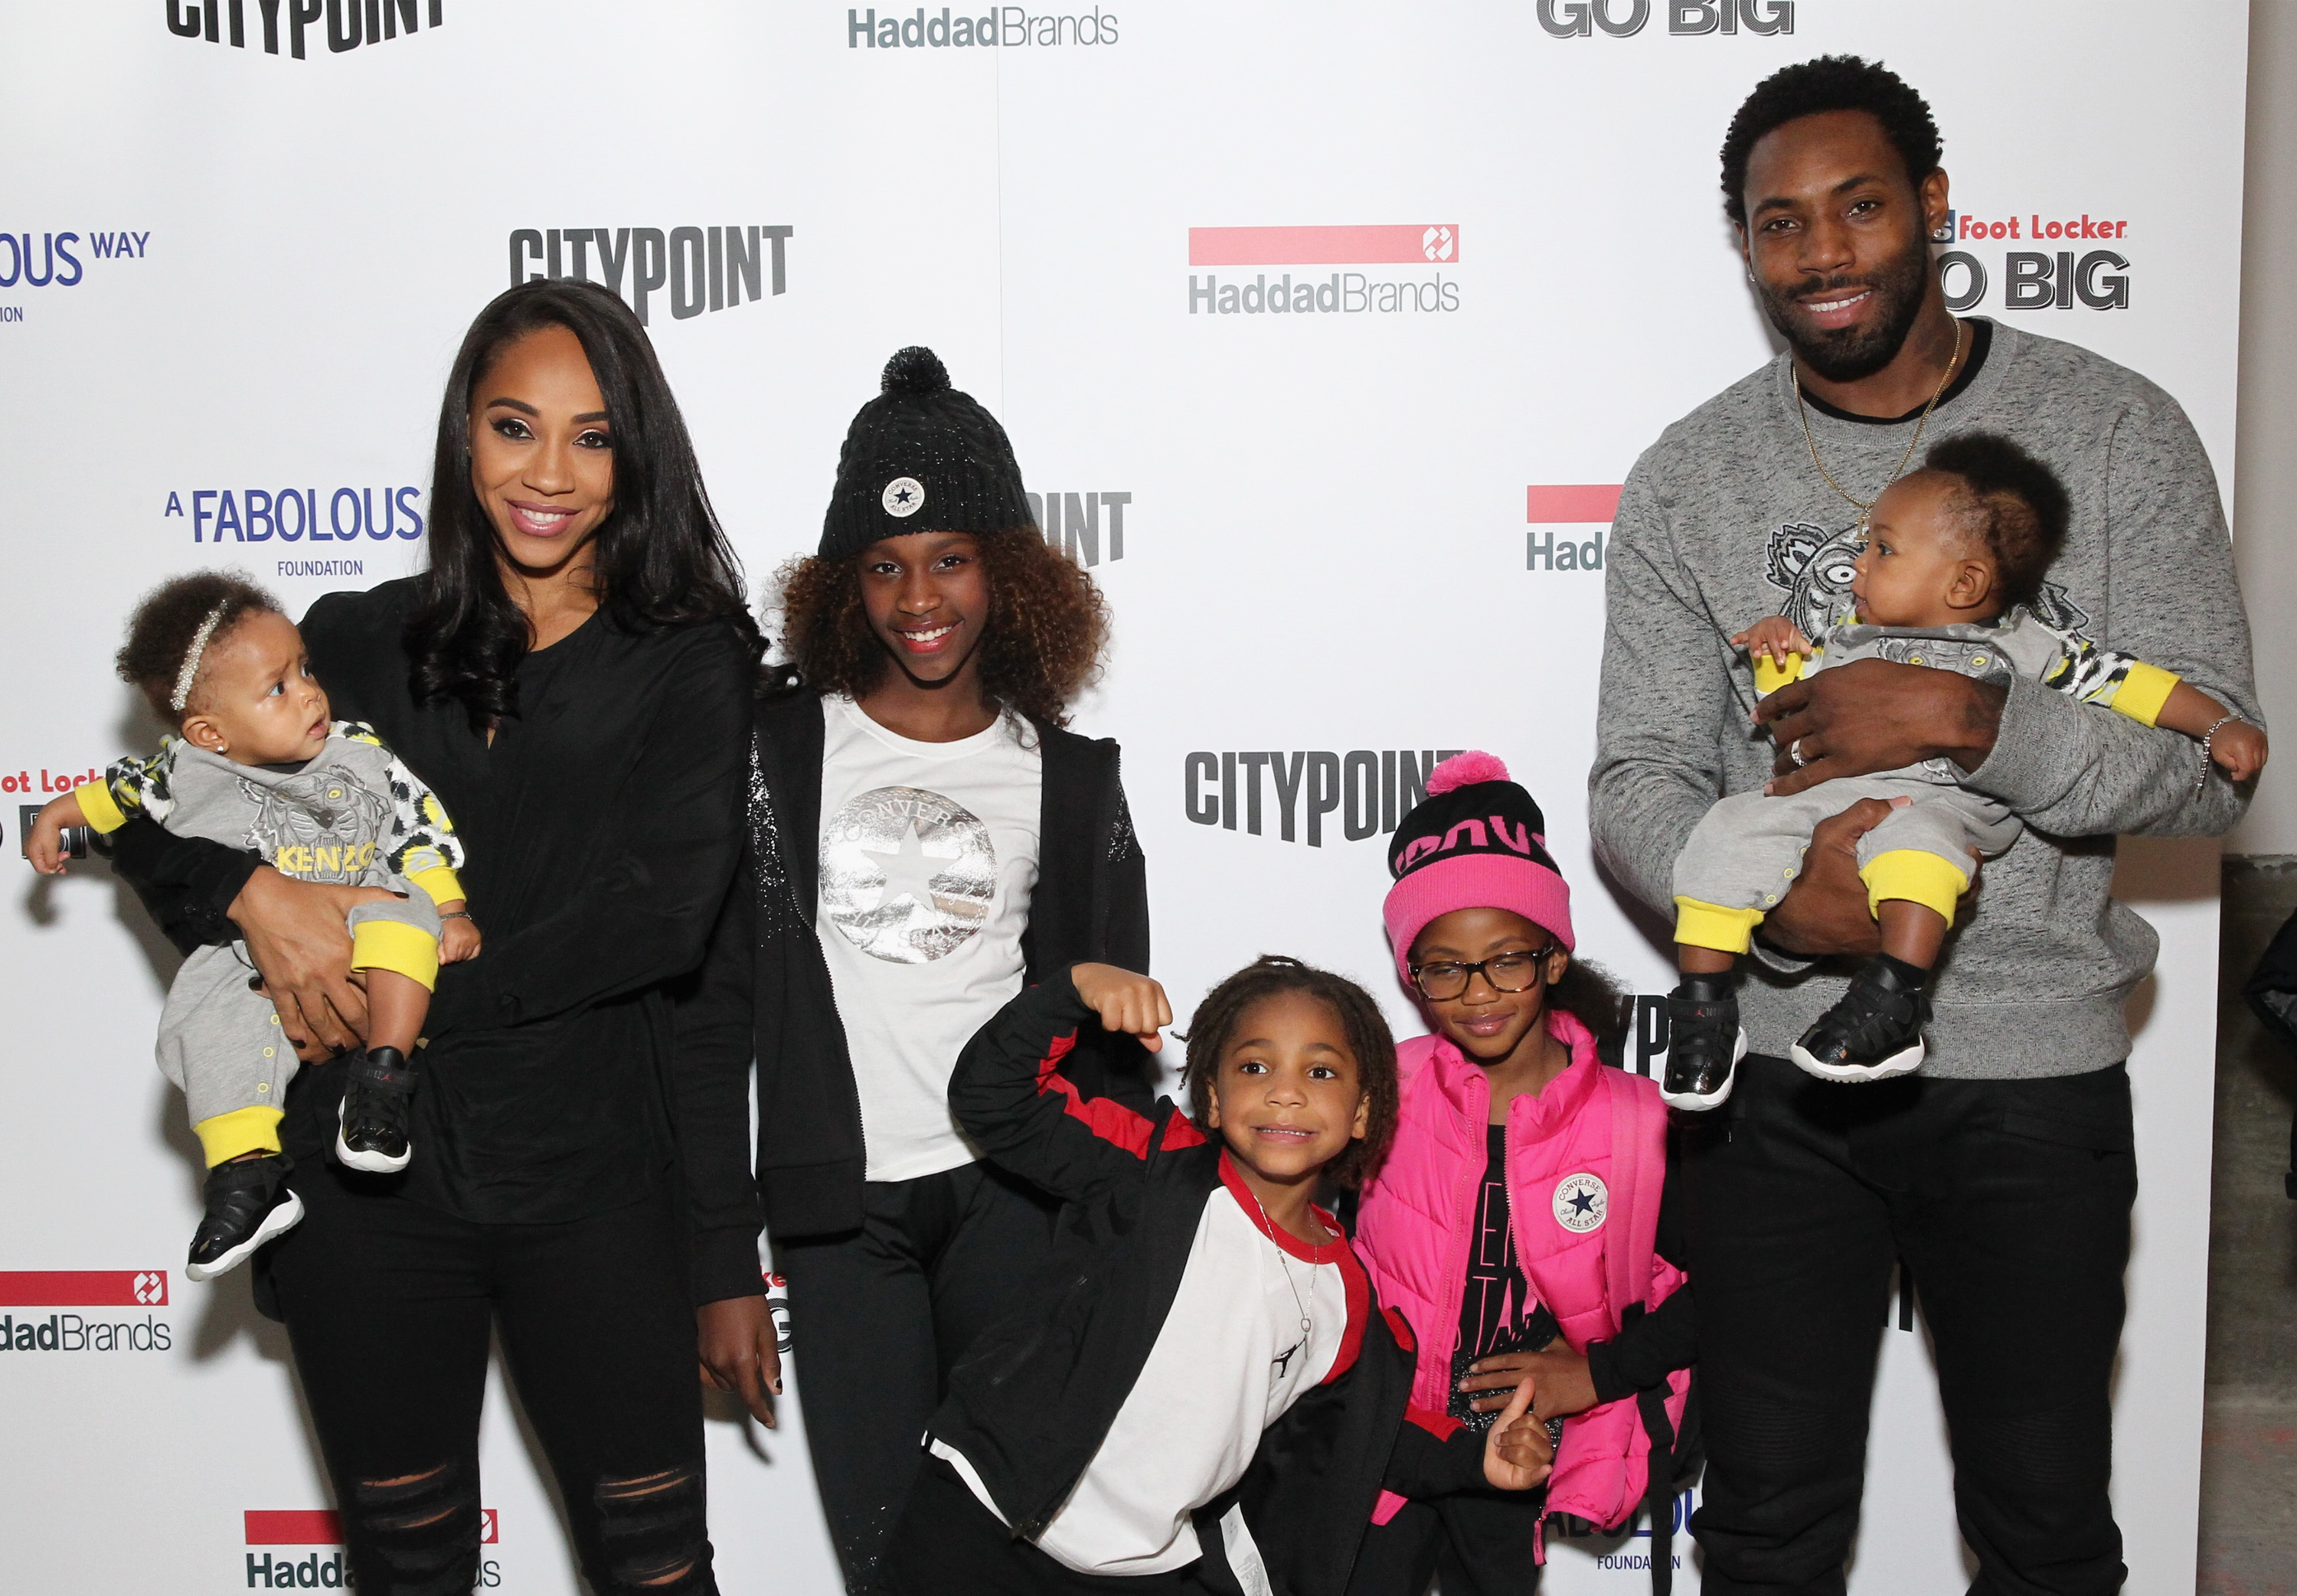 BROOKLYN, NY - NOVEMBER 09:  Football player Antonio Cromartie (L) and Terricka Cromartie pose with their children during BKLYN Rocks presented by City Point, Kids Foot Locker, and Haddad Brands at City Point on November 9, 2016 in Brooklyn City.  